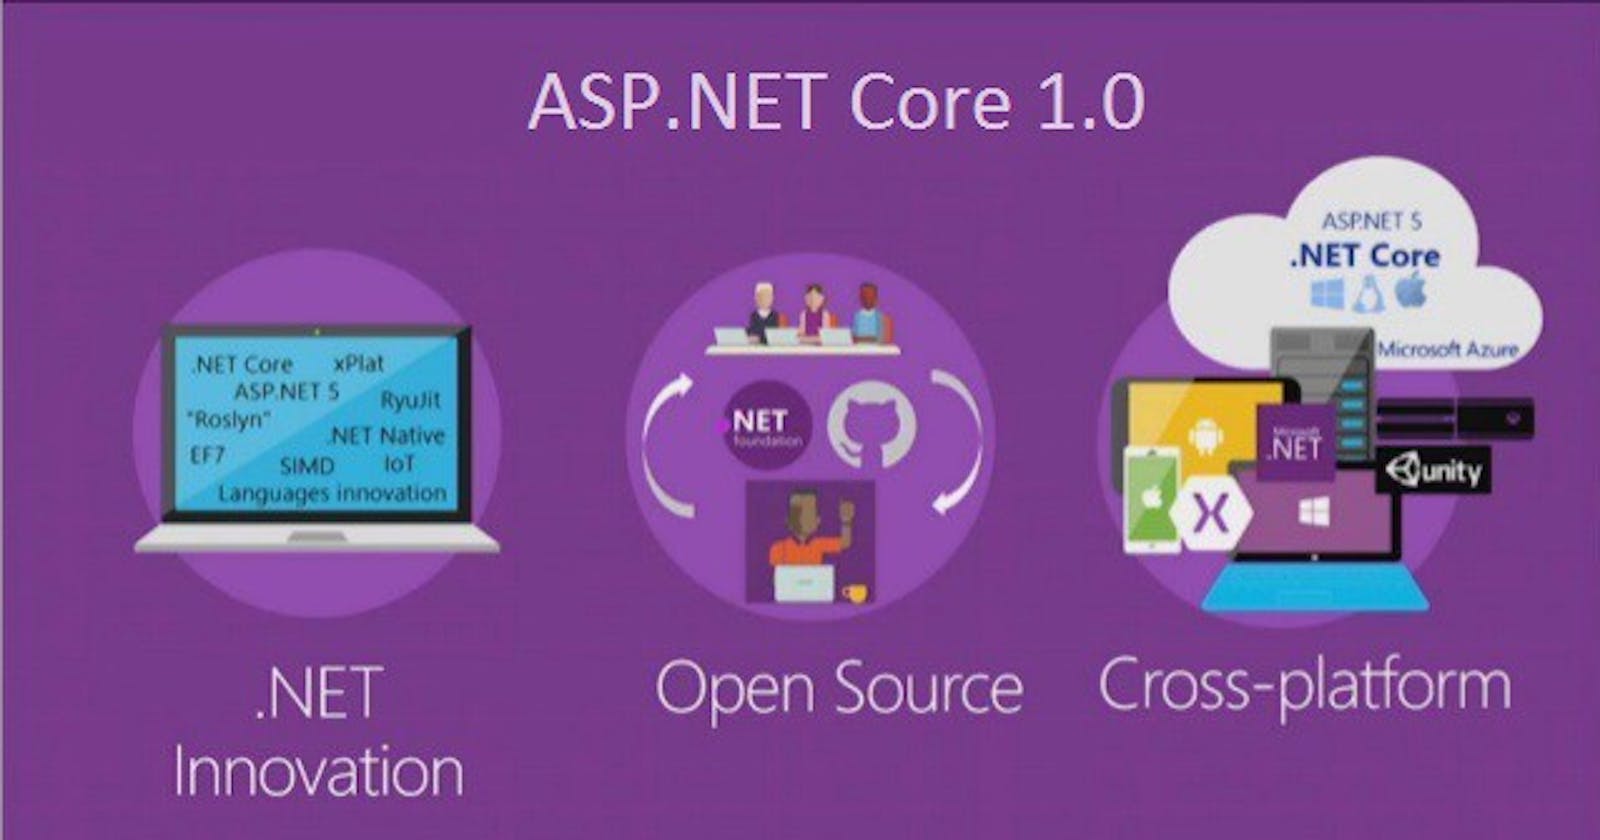 Is it better to get start with ASP.NET core (ASP.NET 5 old name ) as a new Developer?